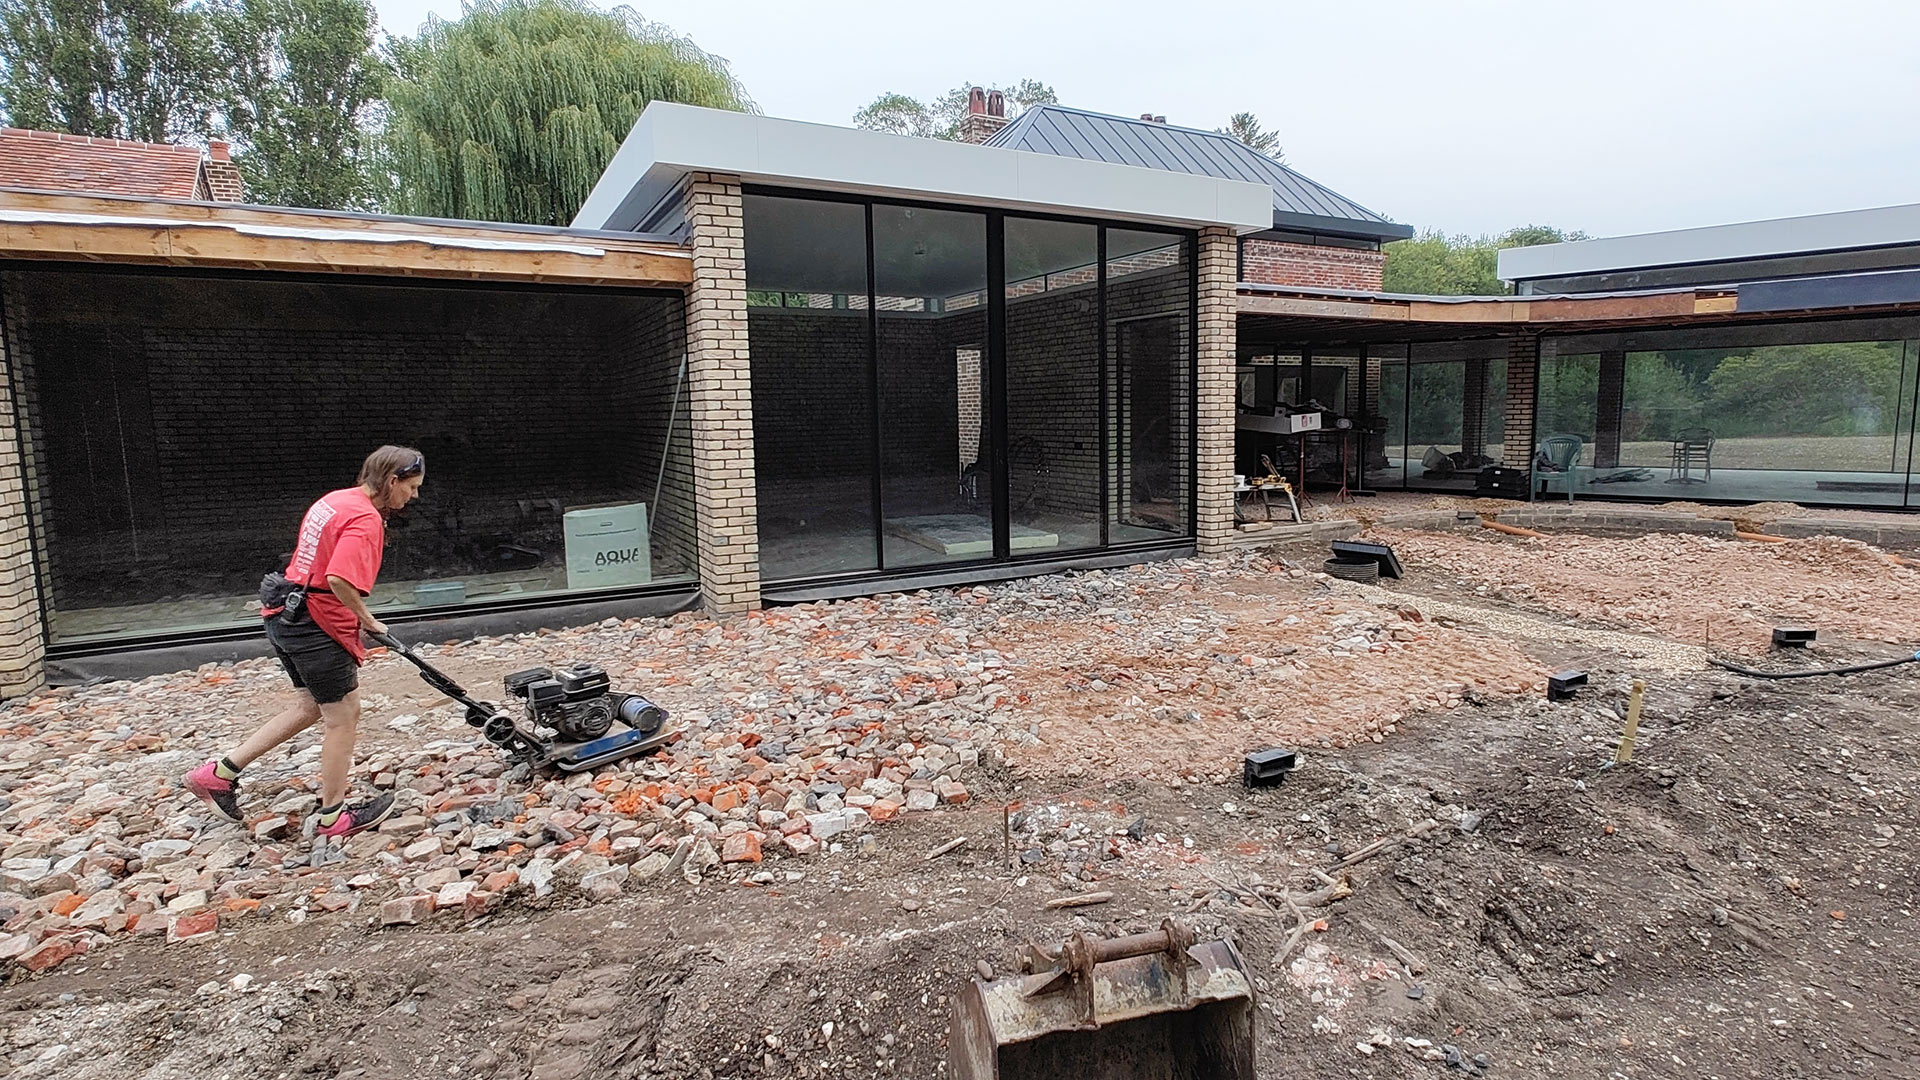 using reclaimed material to build garden area in front of house with large glass windows